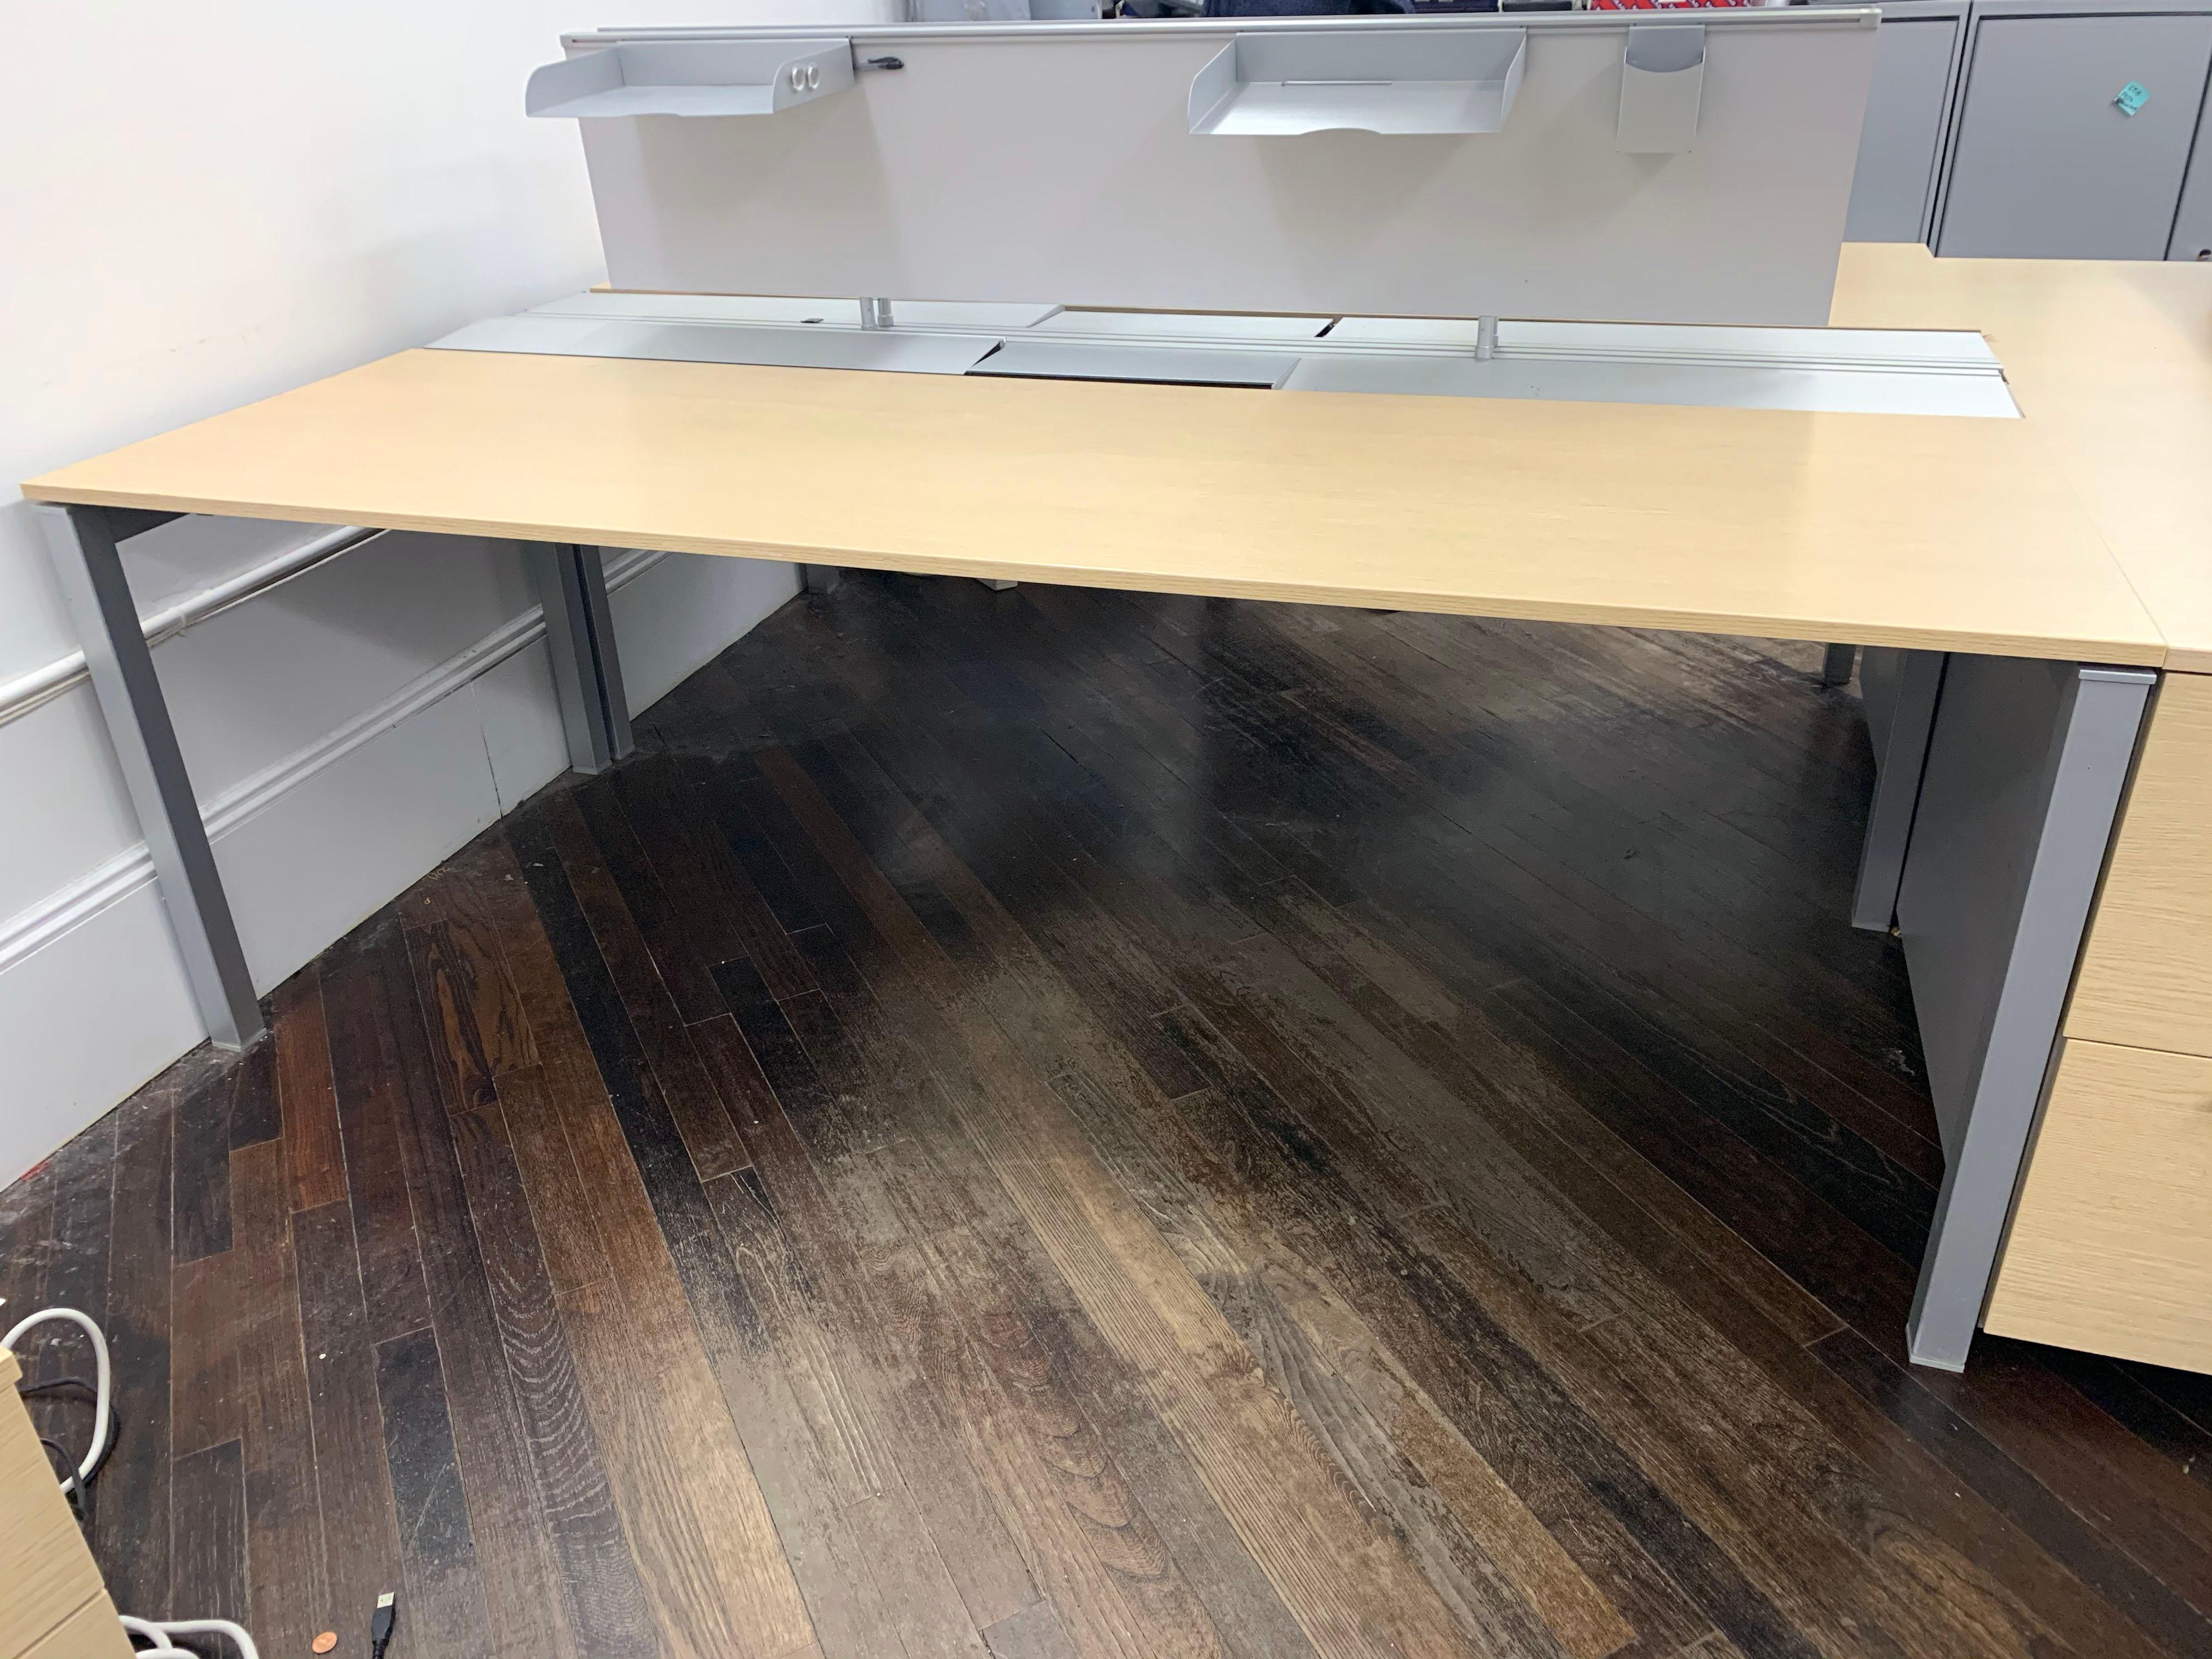 Desk with four powder coat silver legs
Laminate with the look of veneer.